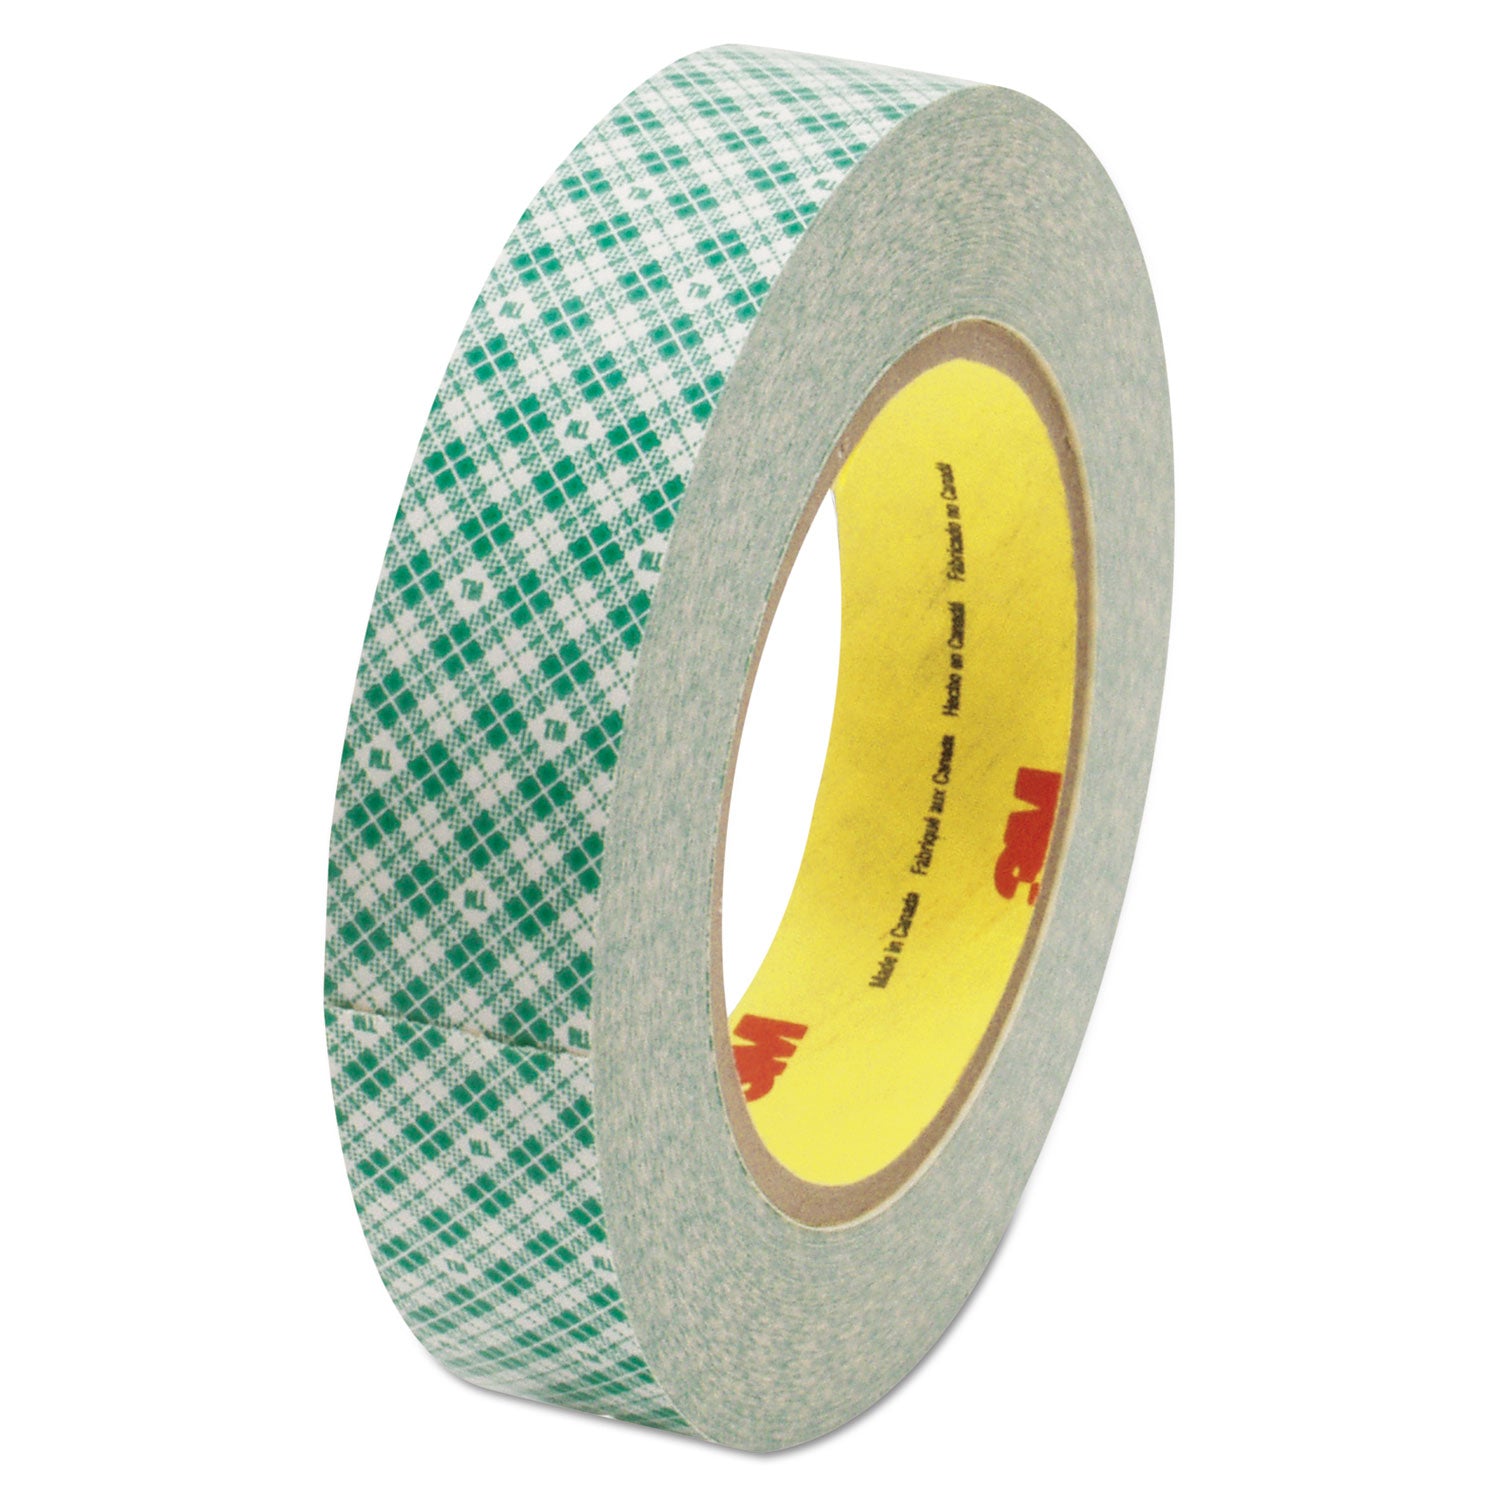 Double-Coated Tissue Tape, 3" Core, 1" x 36 yds, White - 